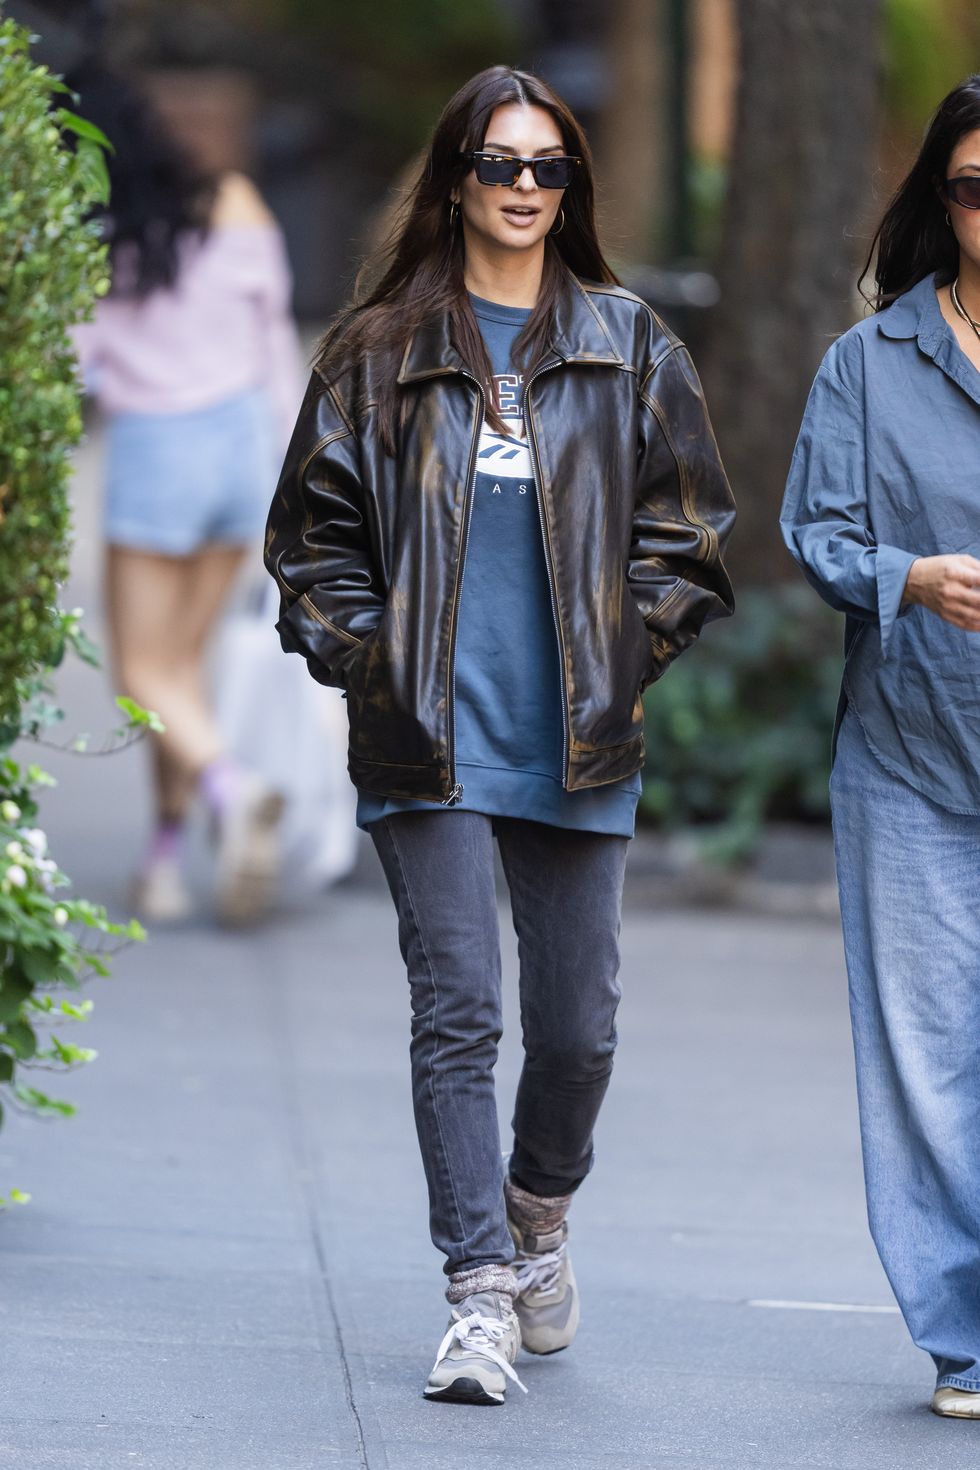 Kylie Jenner Gives Favorite Prada Boots Edge With Moto Jacket